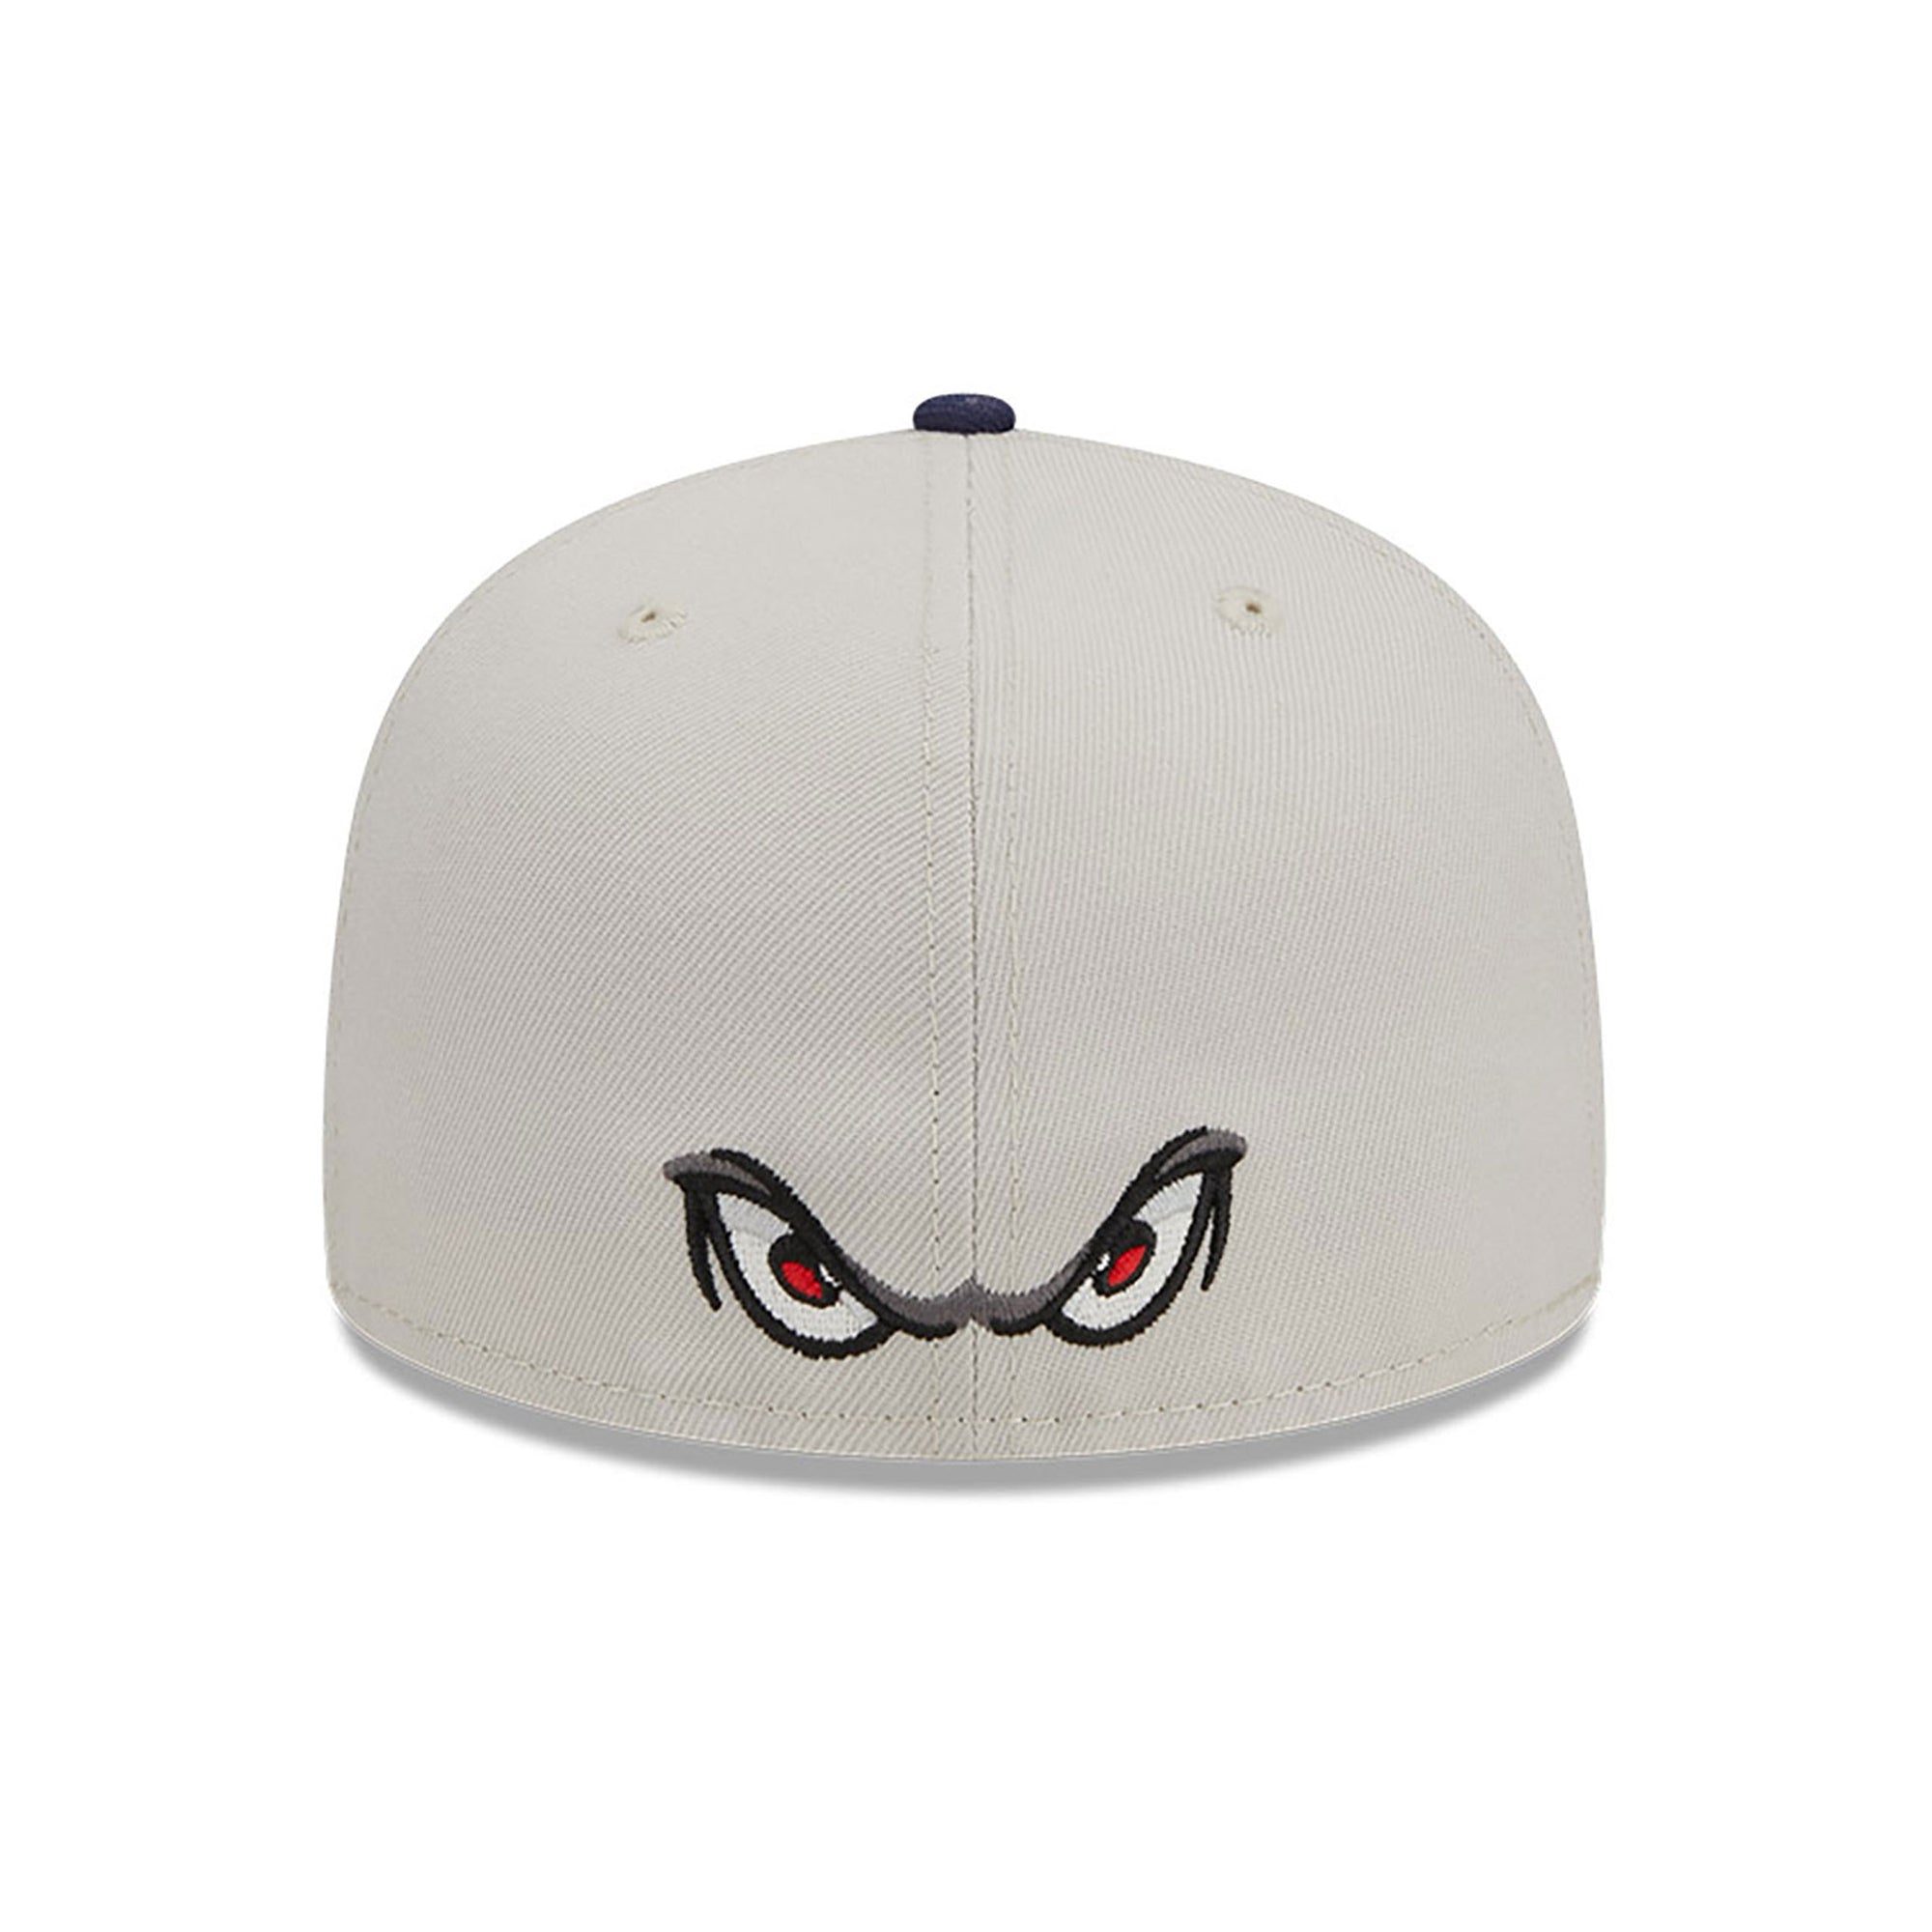 San Diego Padres Farm Team SoleFly Hat - Fitted 59FIFTY